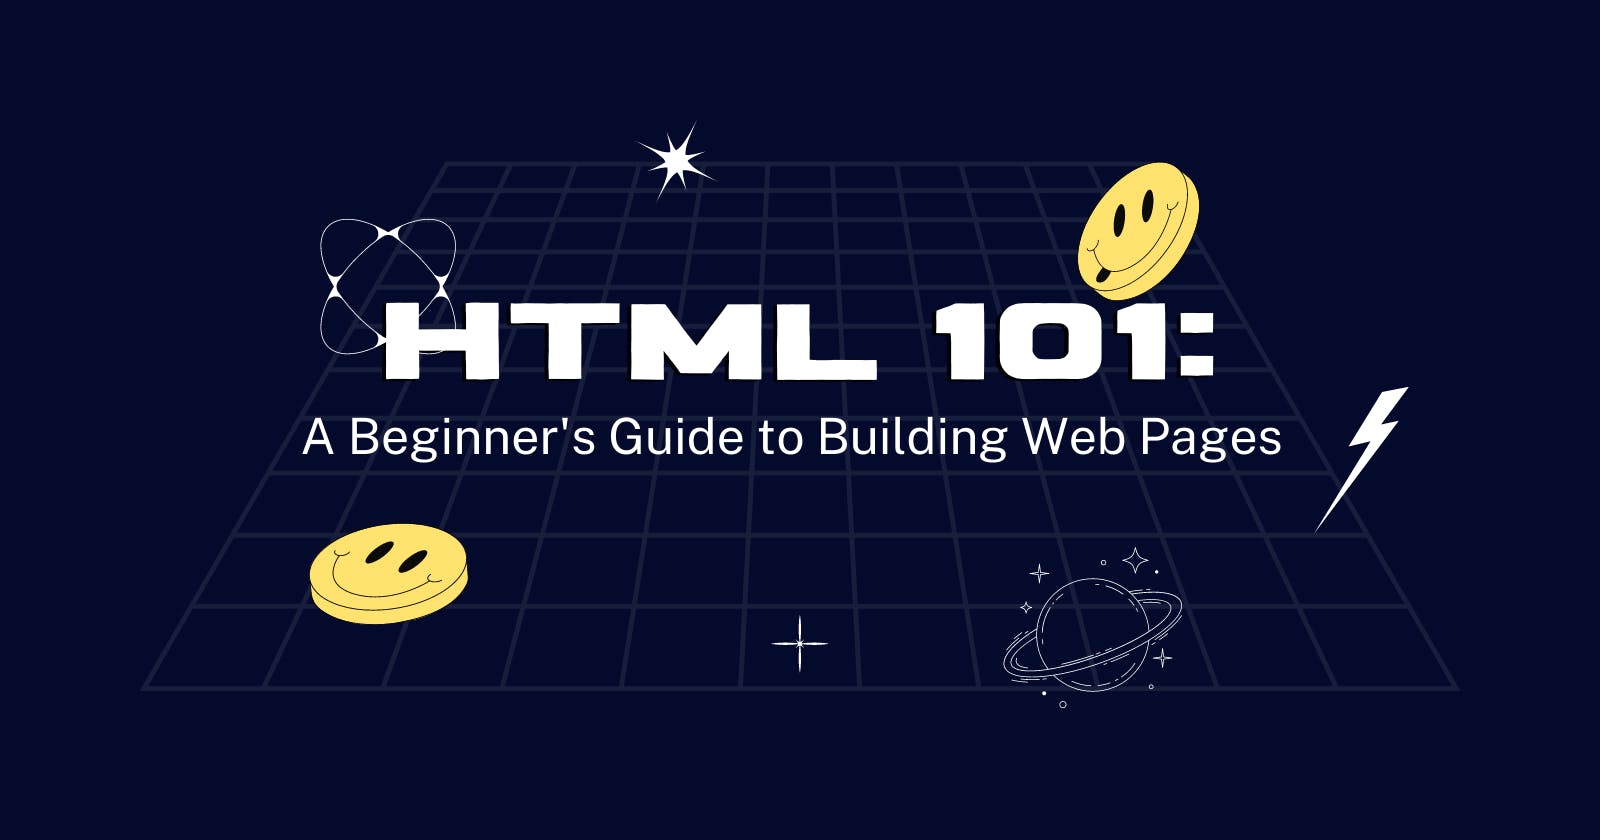 Let's Learn the Building Blocks of the Web